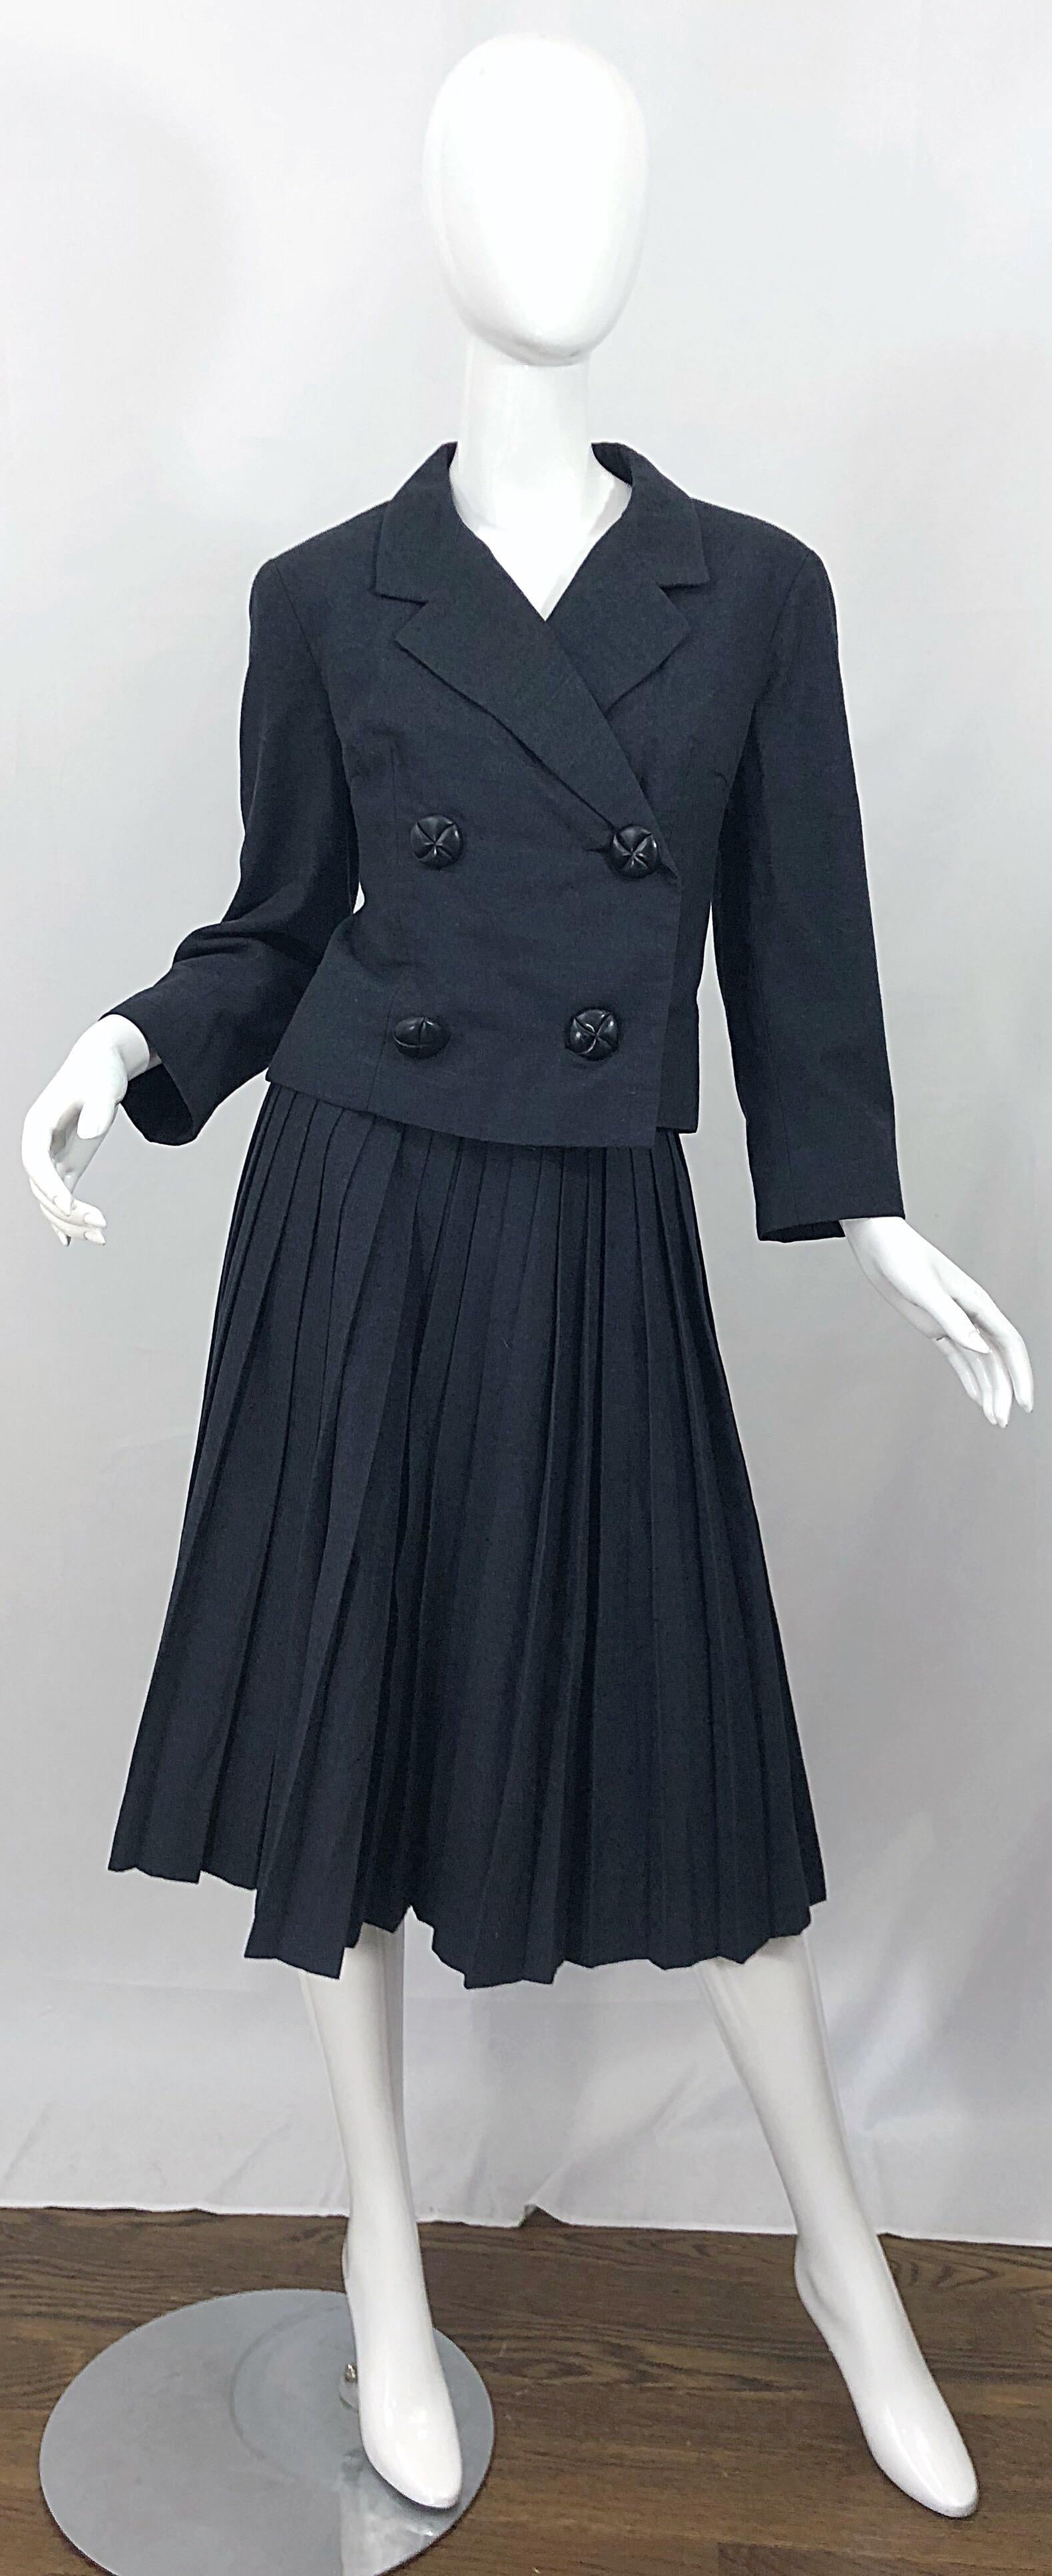 Chic, classic and rare early 1960s CHRISTIAN DIOR demi couture charcoal gray  wool skirt suit! Features a pillbox style cropped double breasted jacket, and knife pleated skirt. Large black lacquer carved buttons, with hidden snap closures. Skirt has